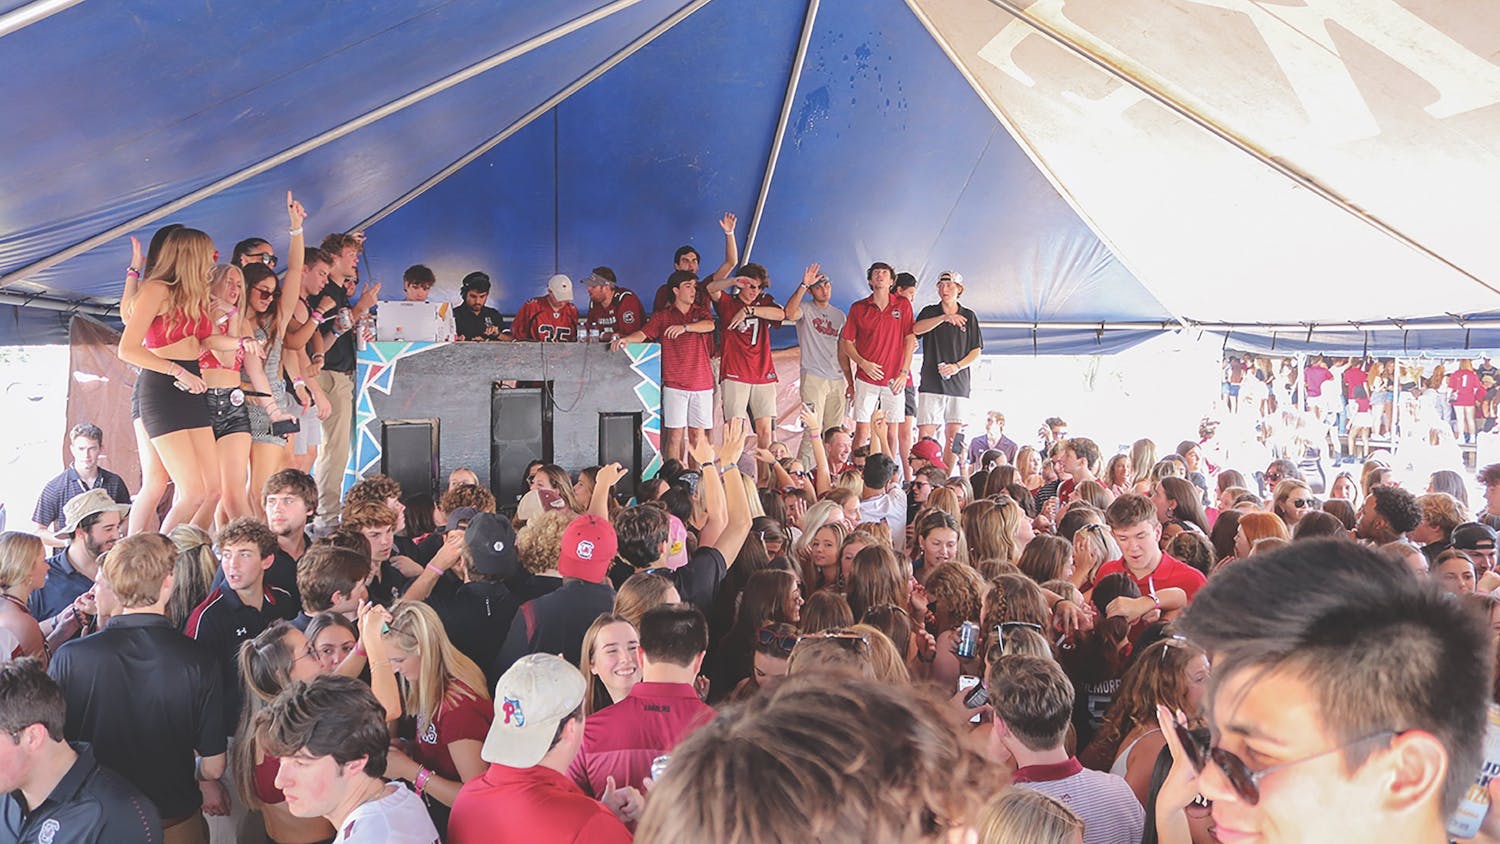 USC students gather under a fraternity tent at the Fraternity Lot, a popular tailgate event held before every home game. The frat lot has faced controversy for being an unsafe environment for underage drinking students, but it still serves as a defining pregame event for thousands of partying USC students.